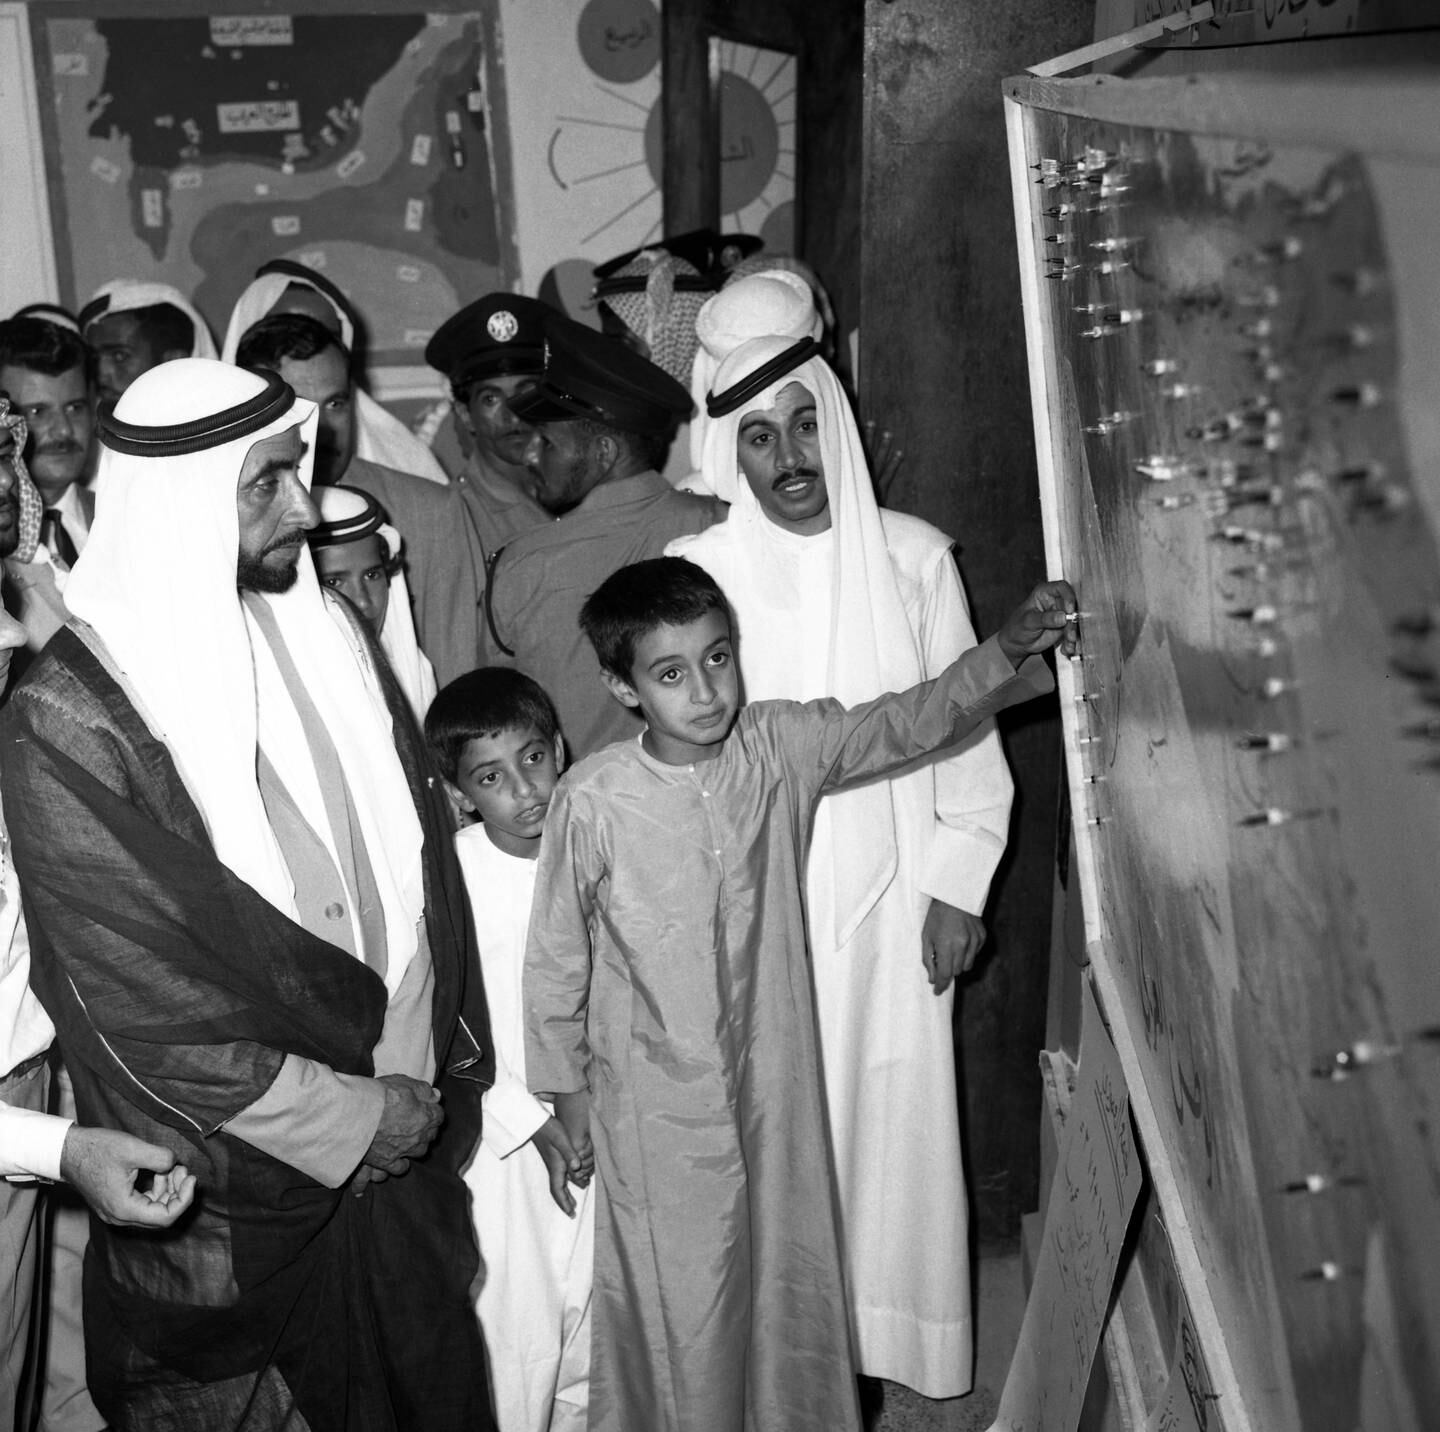 The late Sheikh Zayed with Sheikh Mohamed at the open day at Al Kindi Primary School in Abu Dhabi. Sheikh Mohamed's teacher, Mohamed Al Tamimi is standing behind him. Photo: National Archives